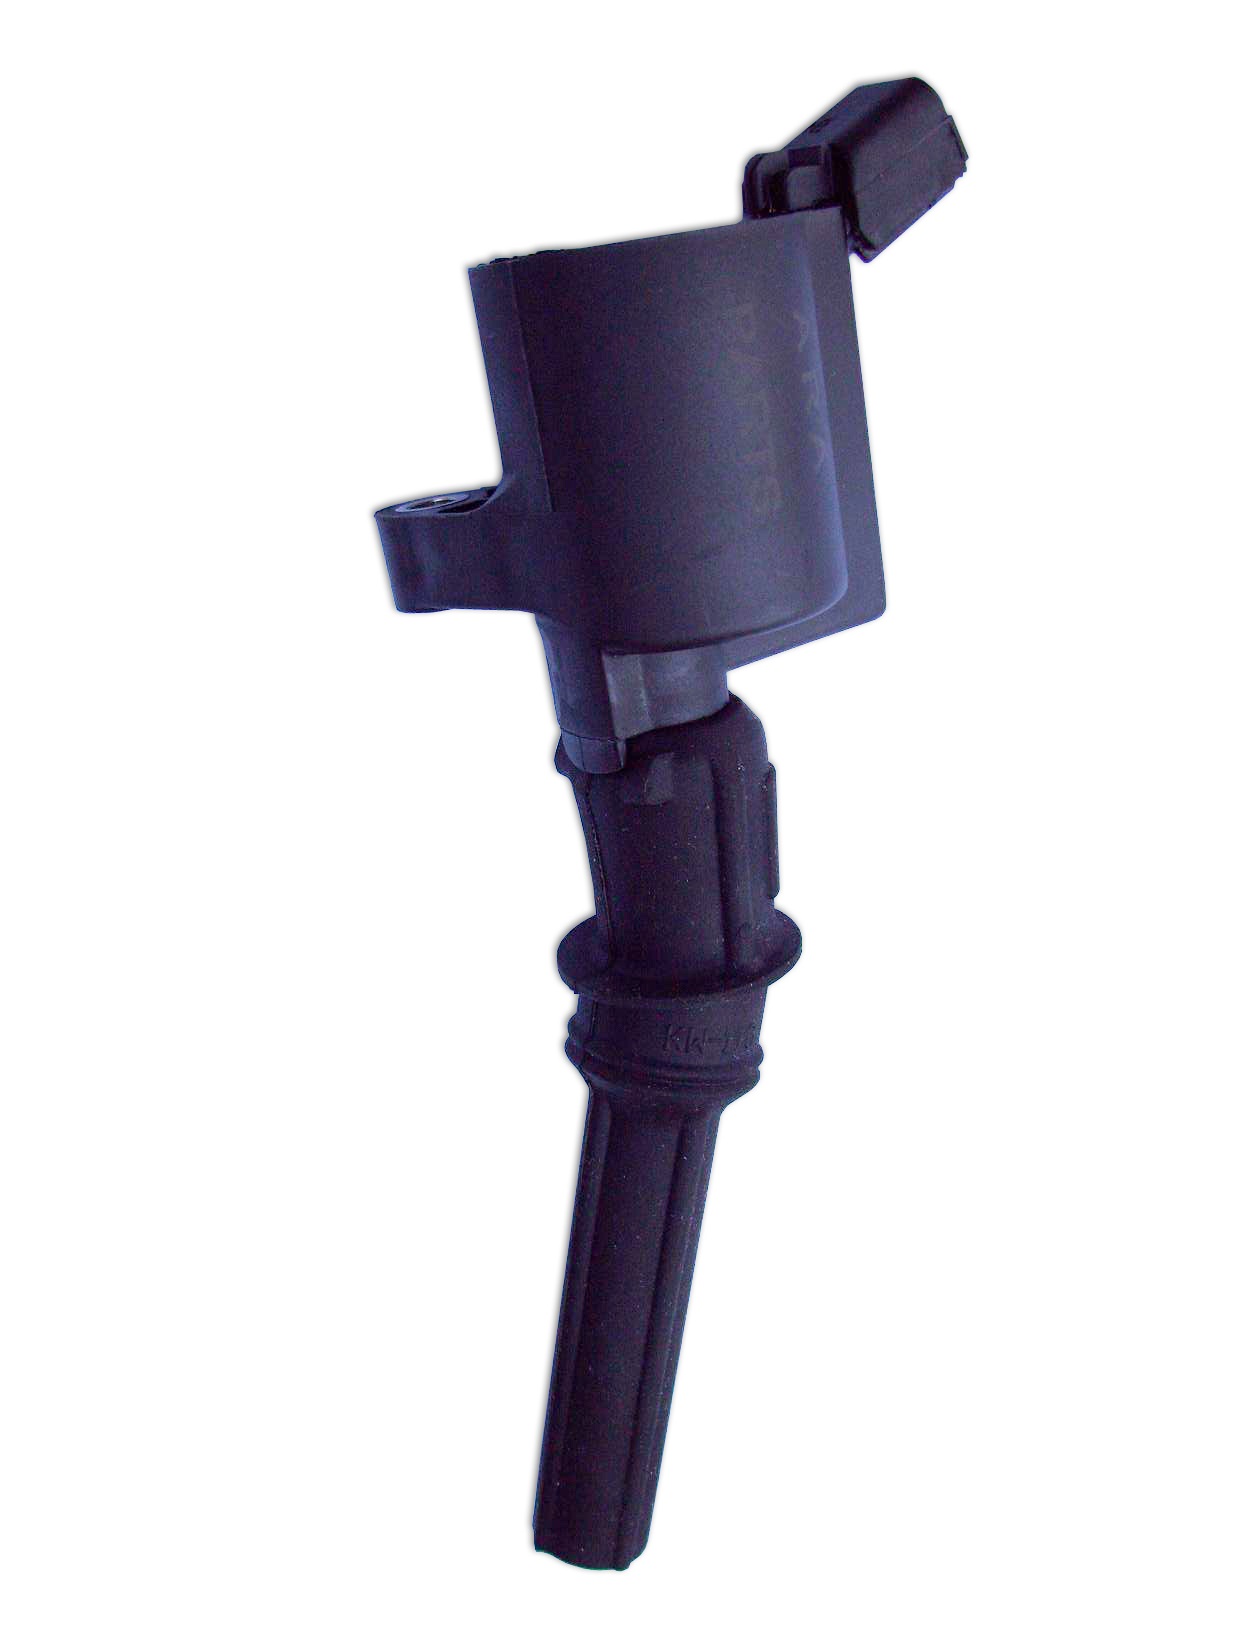 This ignition coil fits a 2003 Ford F150 with the 4.6L  or 5.4L V8. The rubber boot has an angle to it.